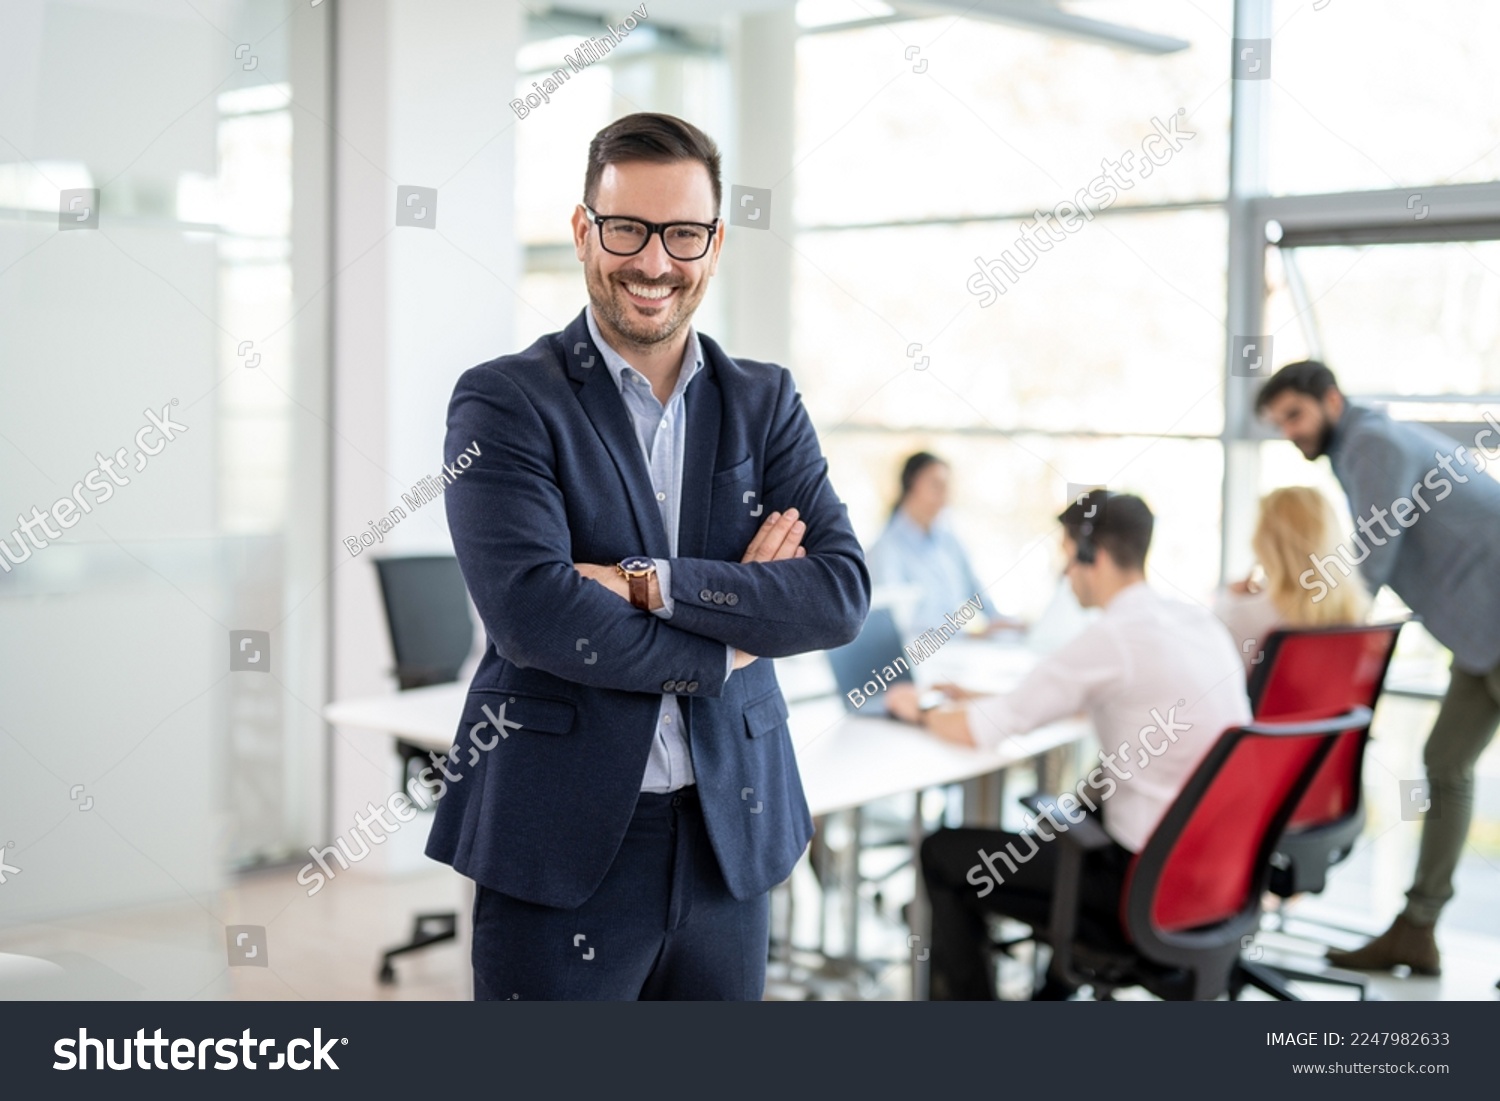 Portrait of confidence business man in formalwear standing with crossed hands at office with colleagues in the background #2247982633